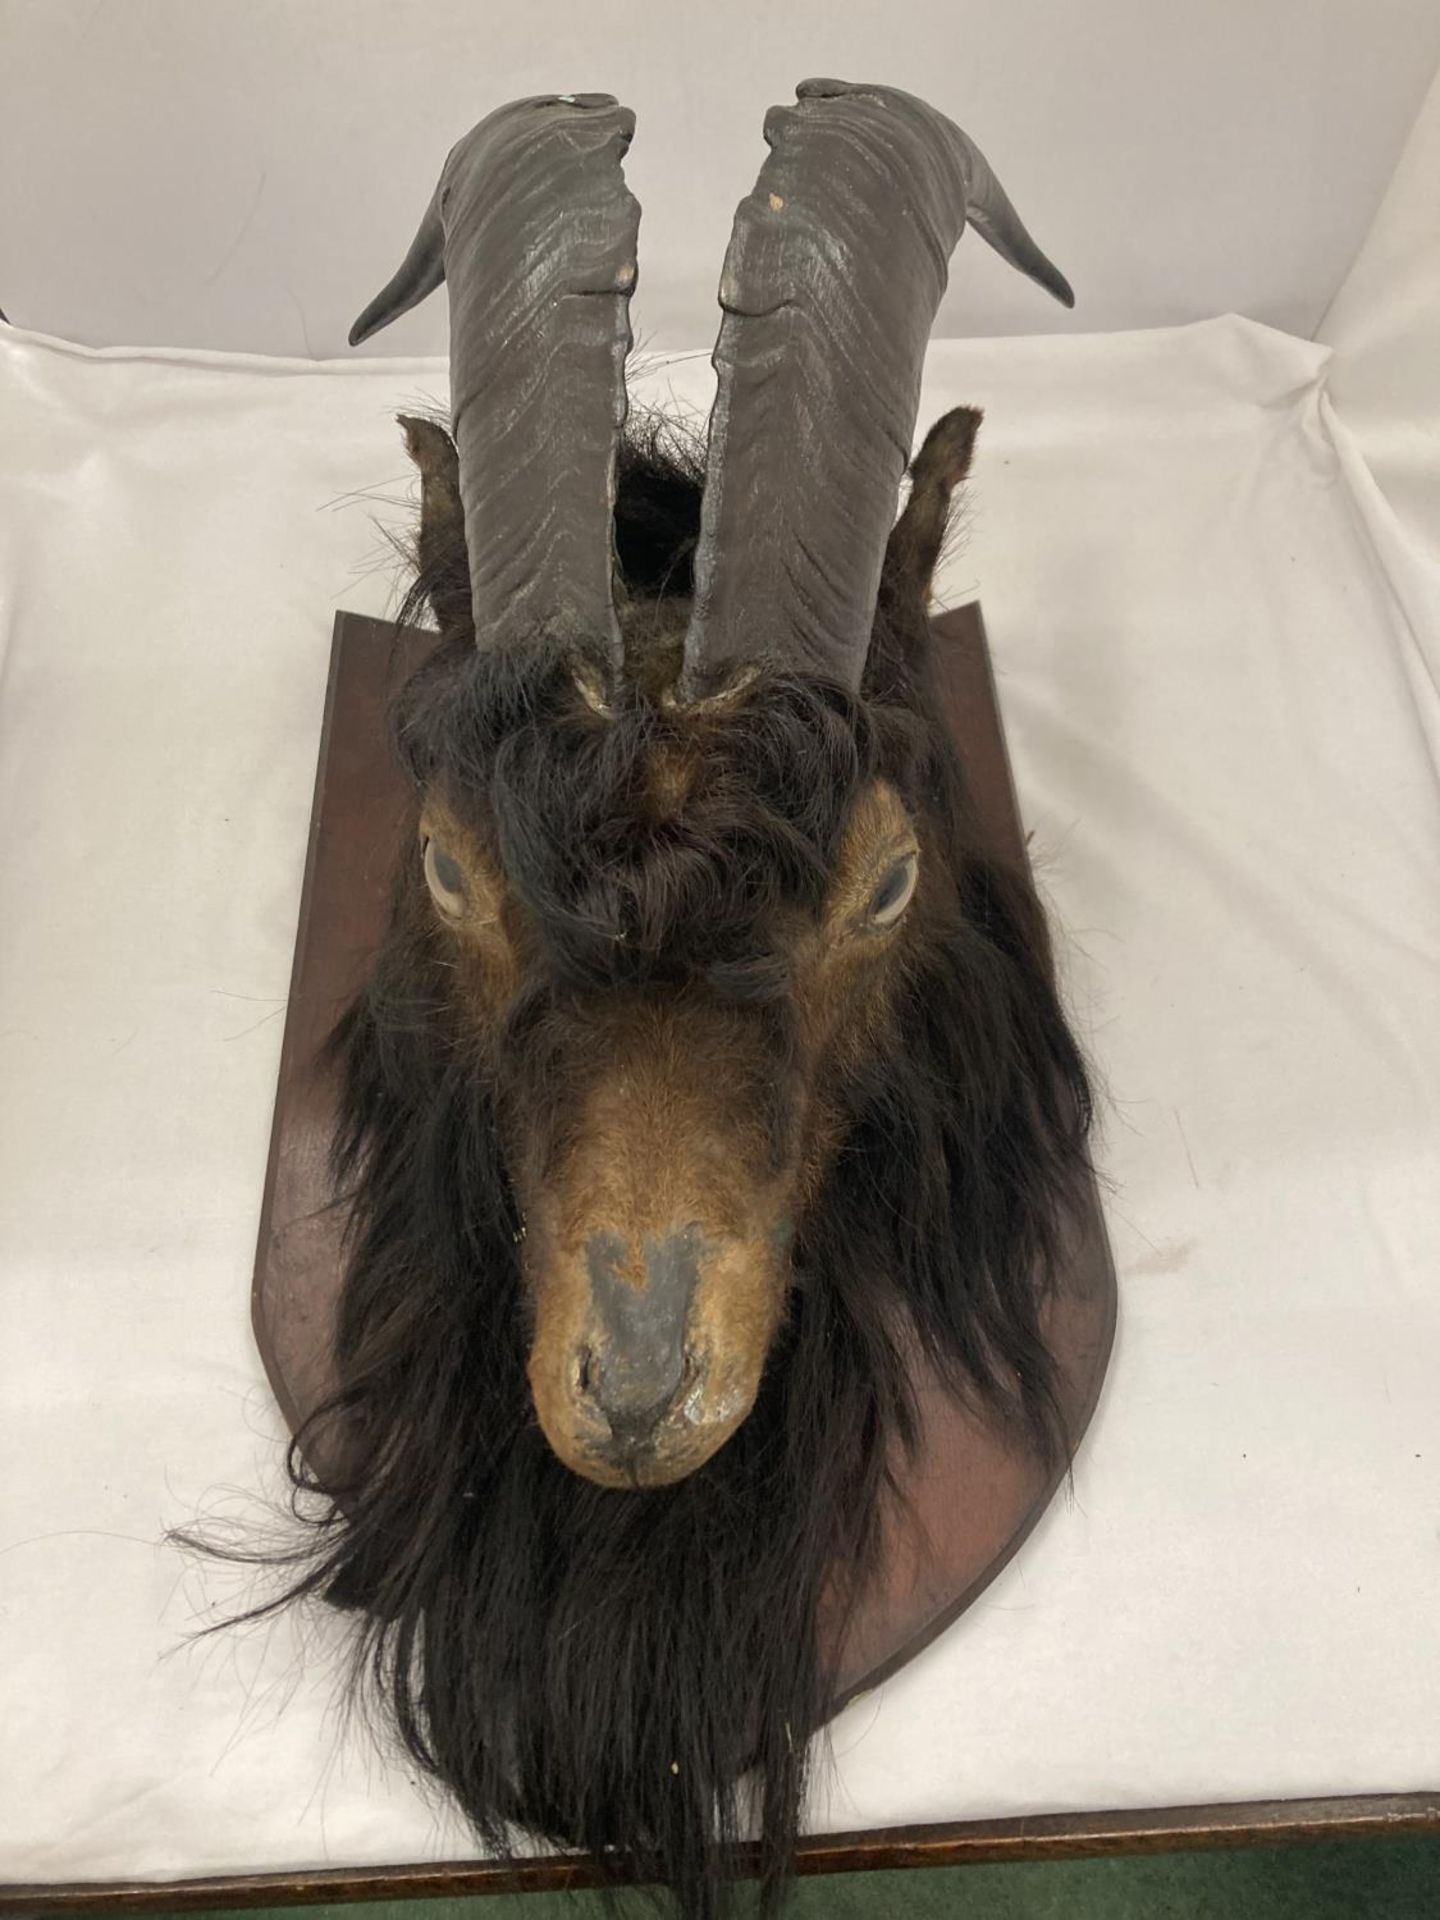 A TAXIDERMY GOAT HEAD ON A WOODEN PLAQUE